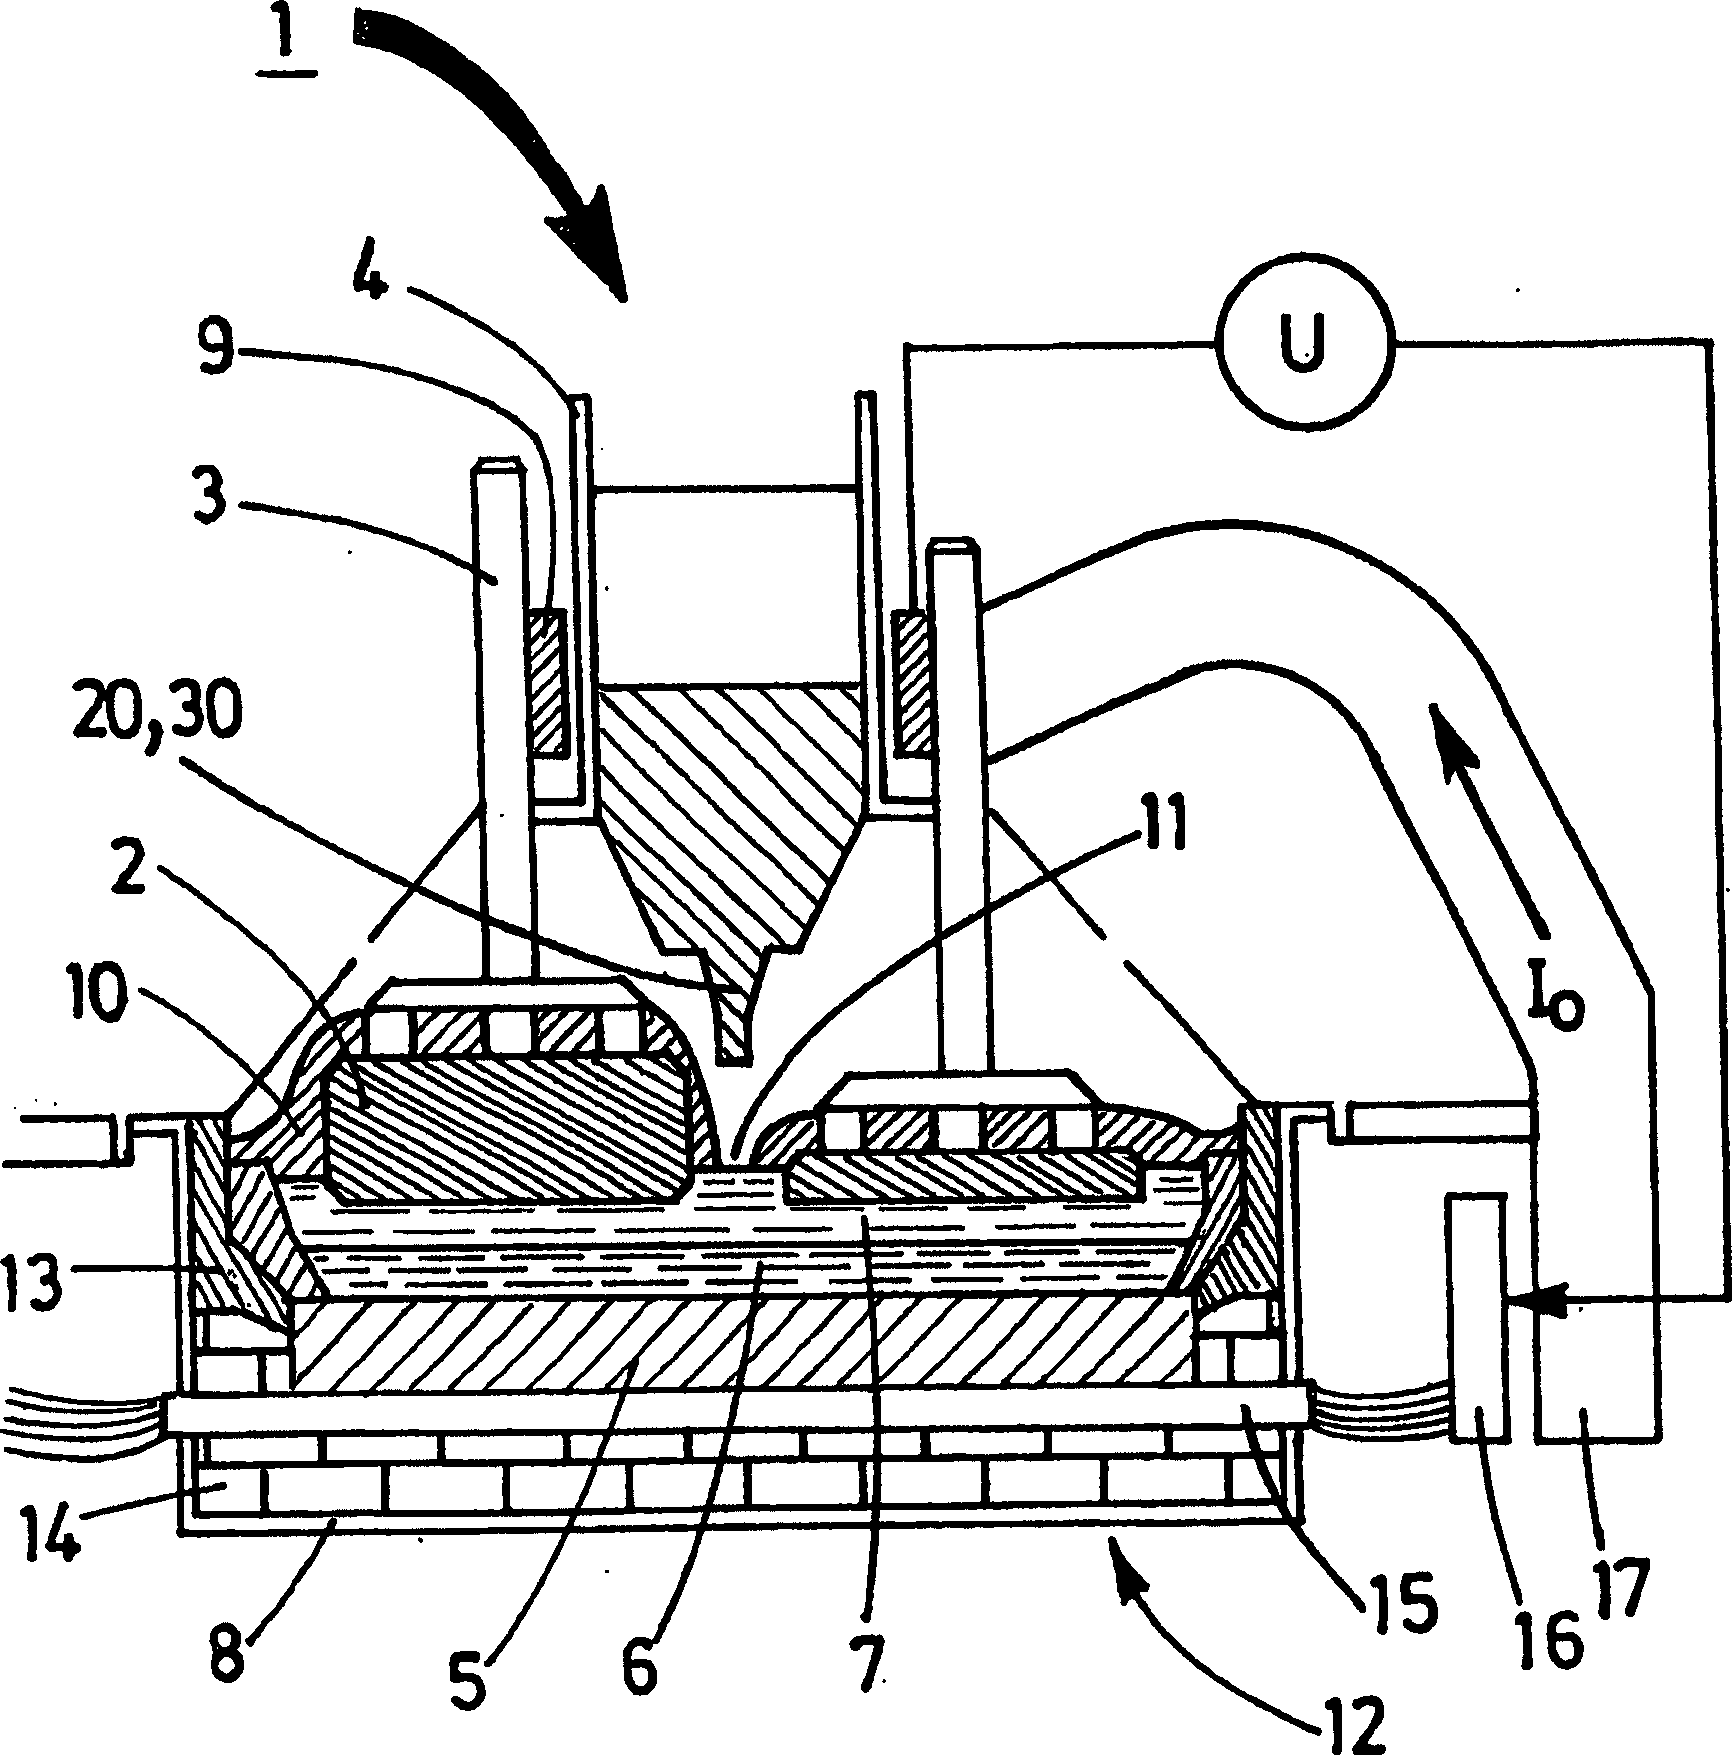 Method and system for controlling addition of powdery materials to the bath of an electrolysis cell for the production of aluminium